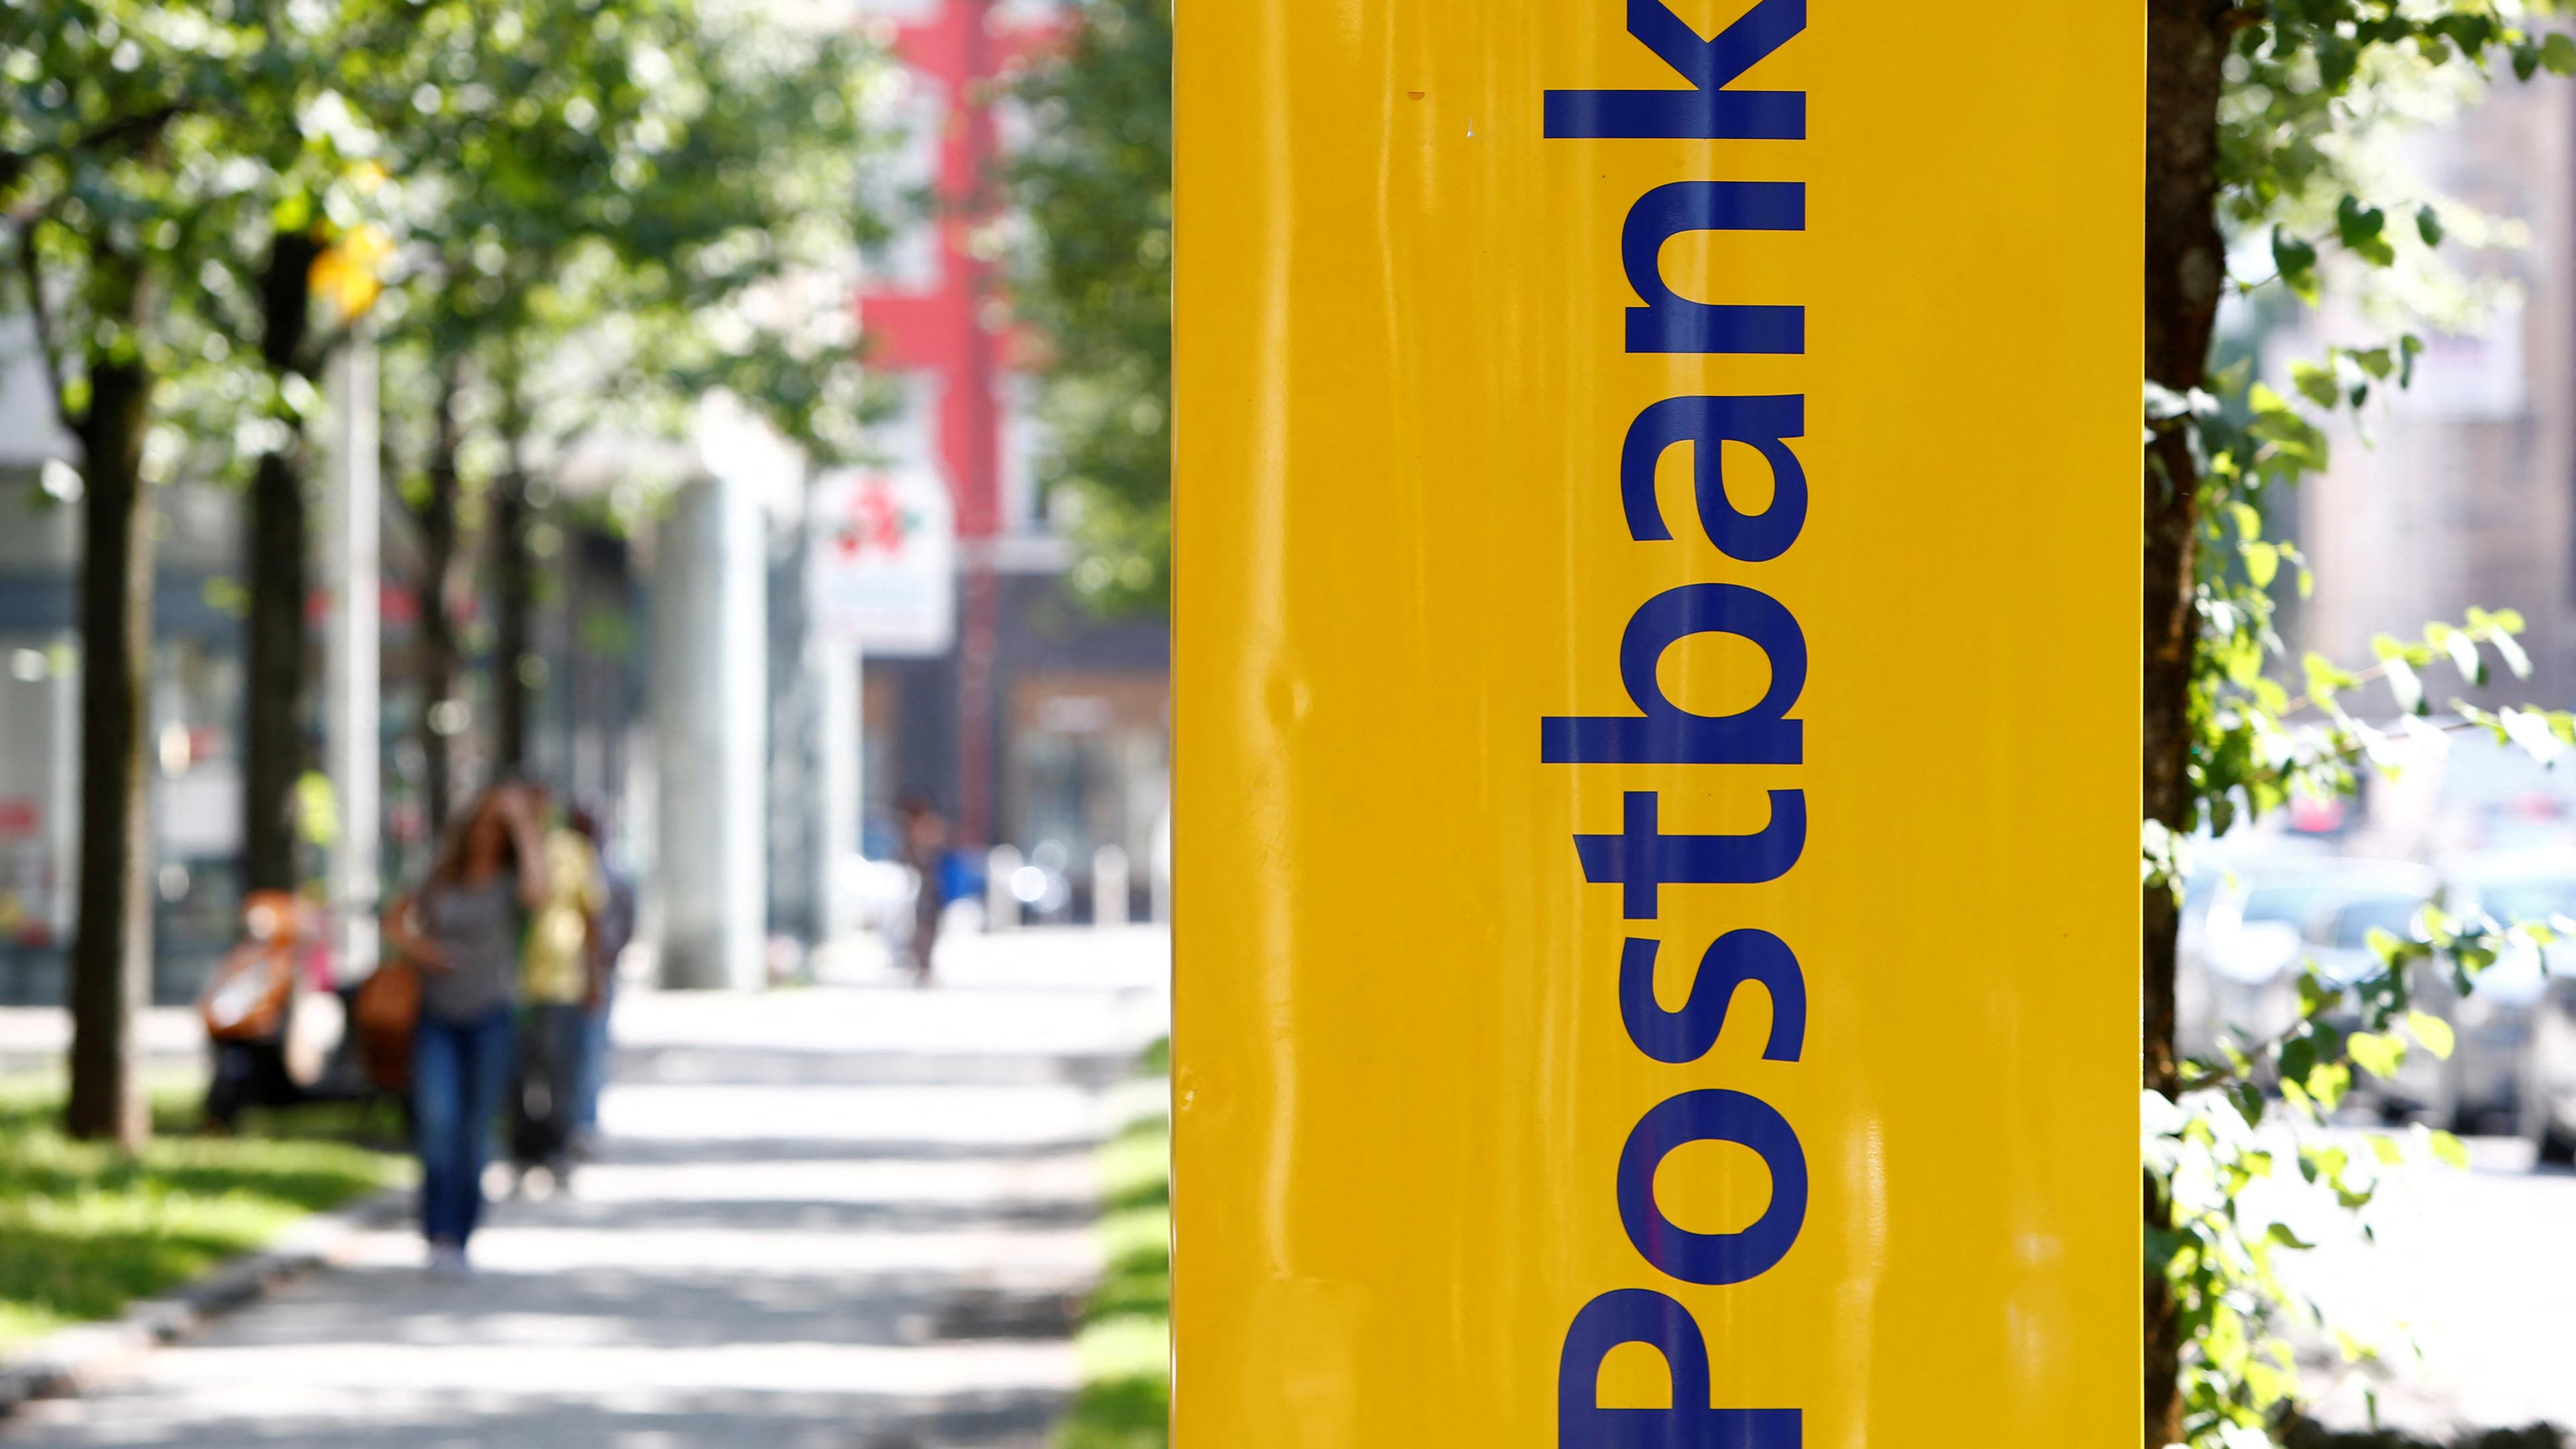   A Postbank sign is seen in Munich, Germany